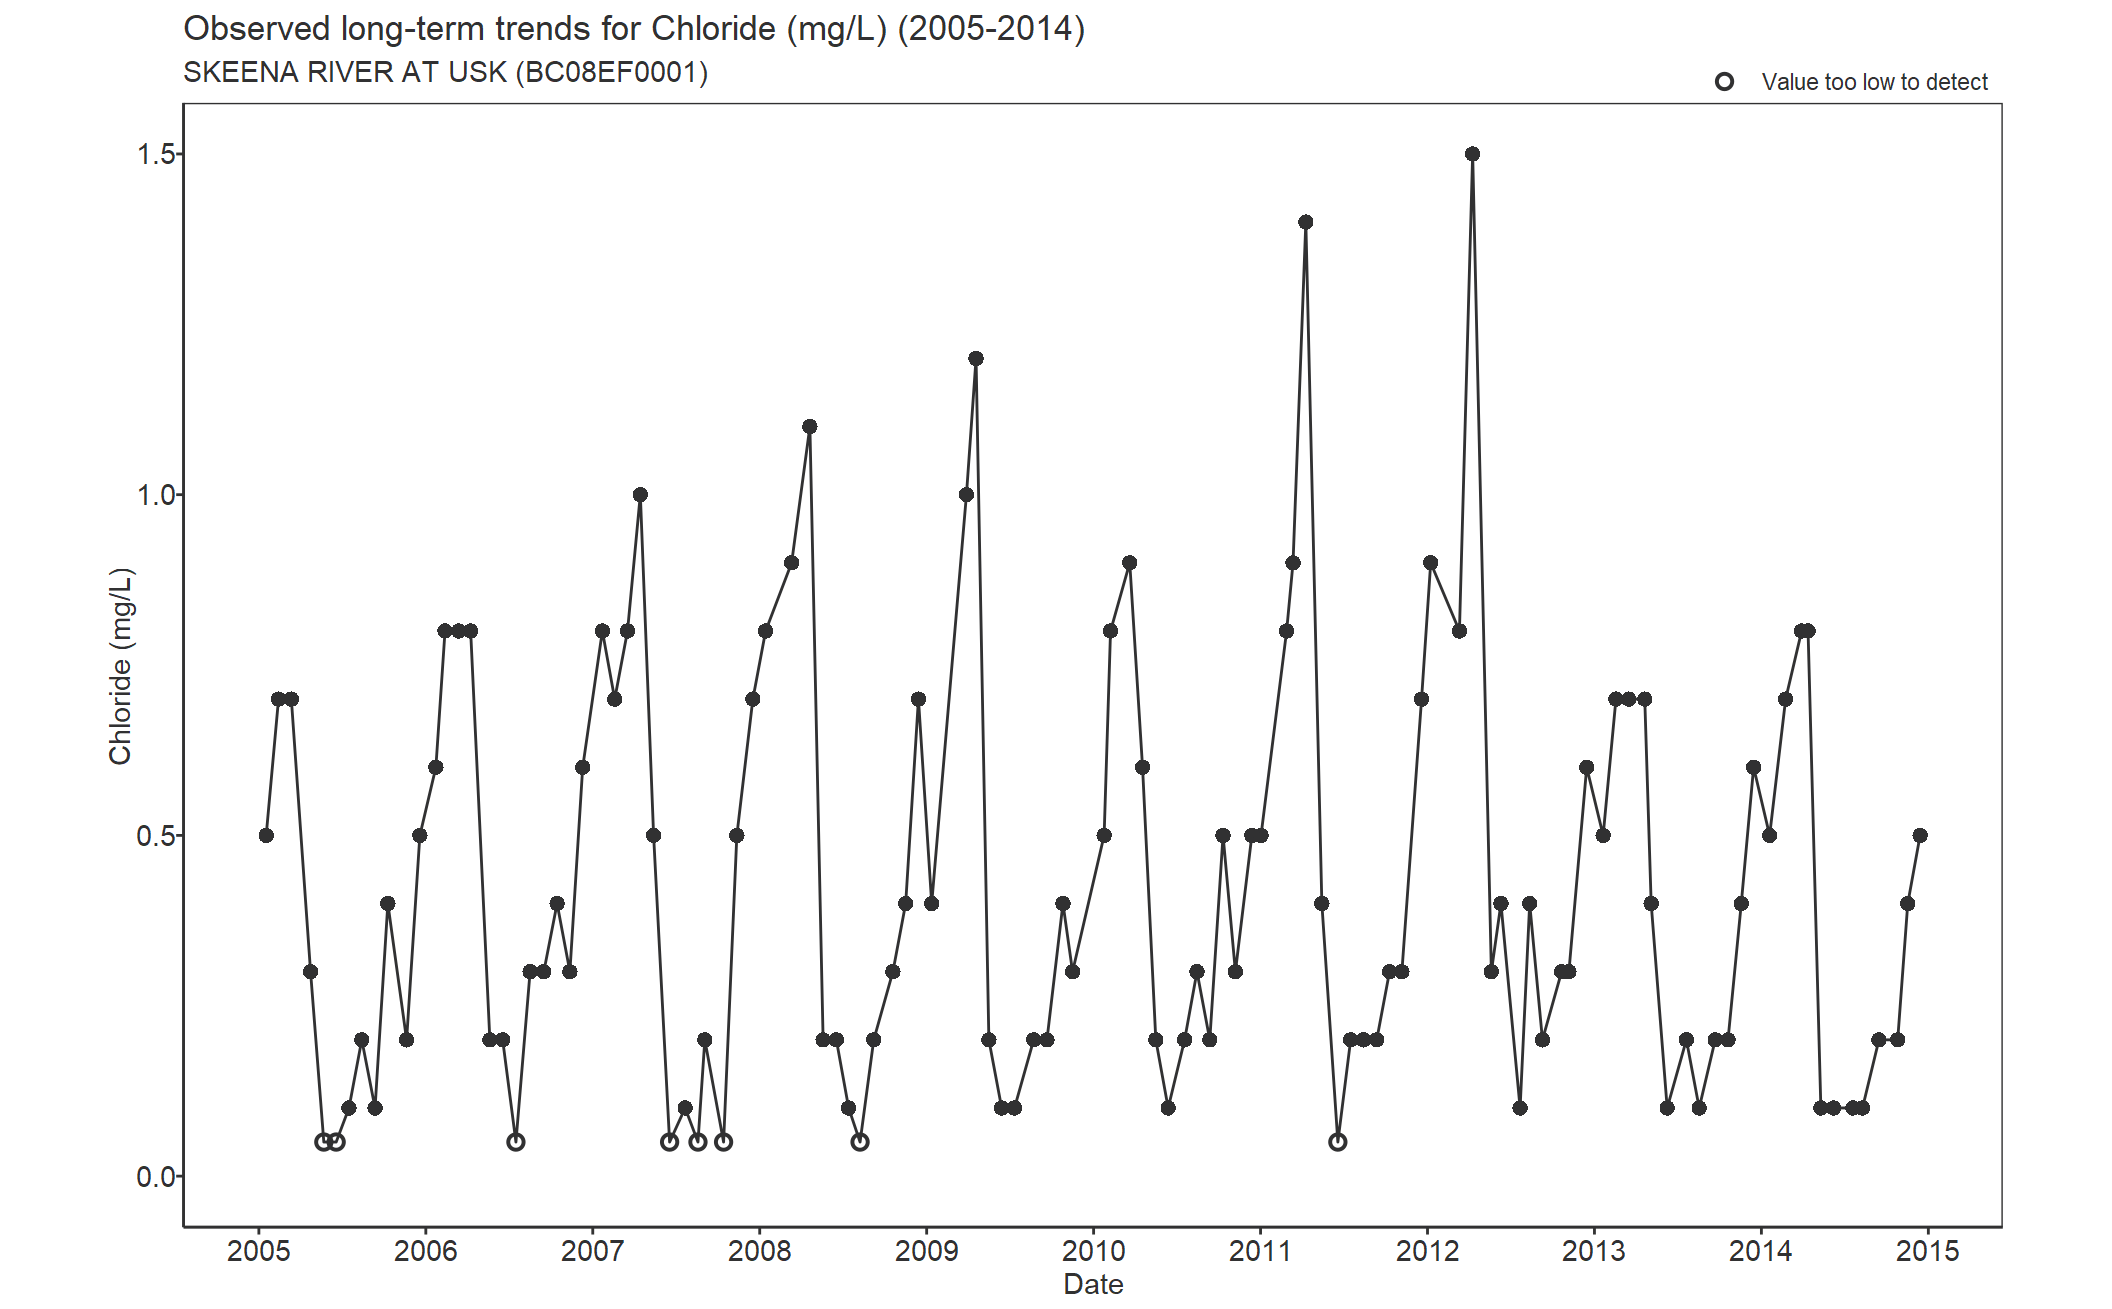 Observed long-term trends for Chloride (2005-2014)